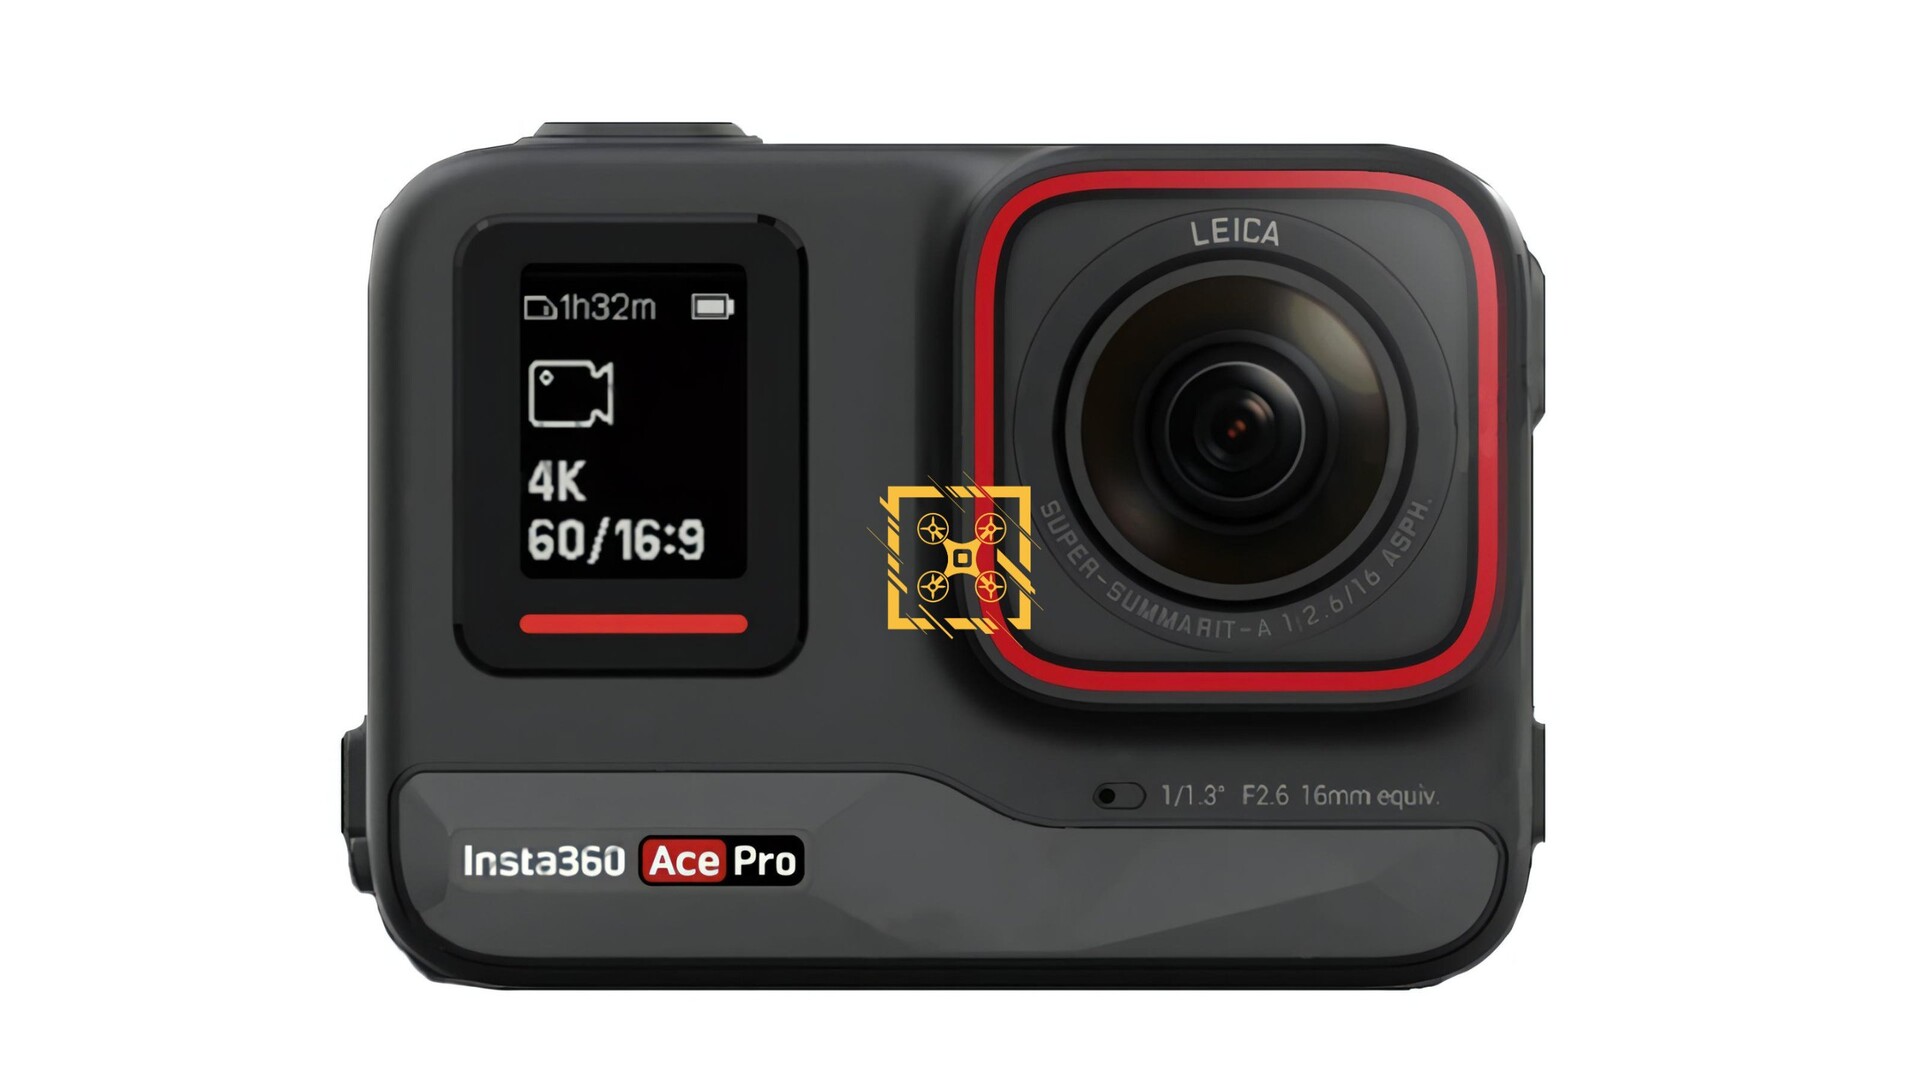 Insta360 Ace & Insta360 Ace Pro Action Cameras - Cycle News